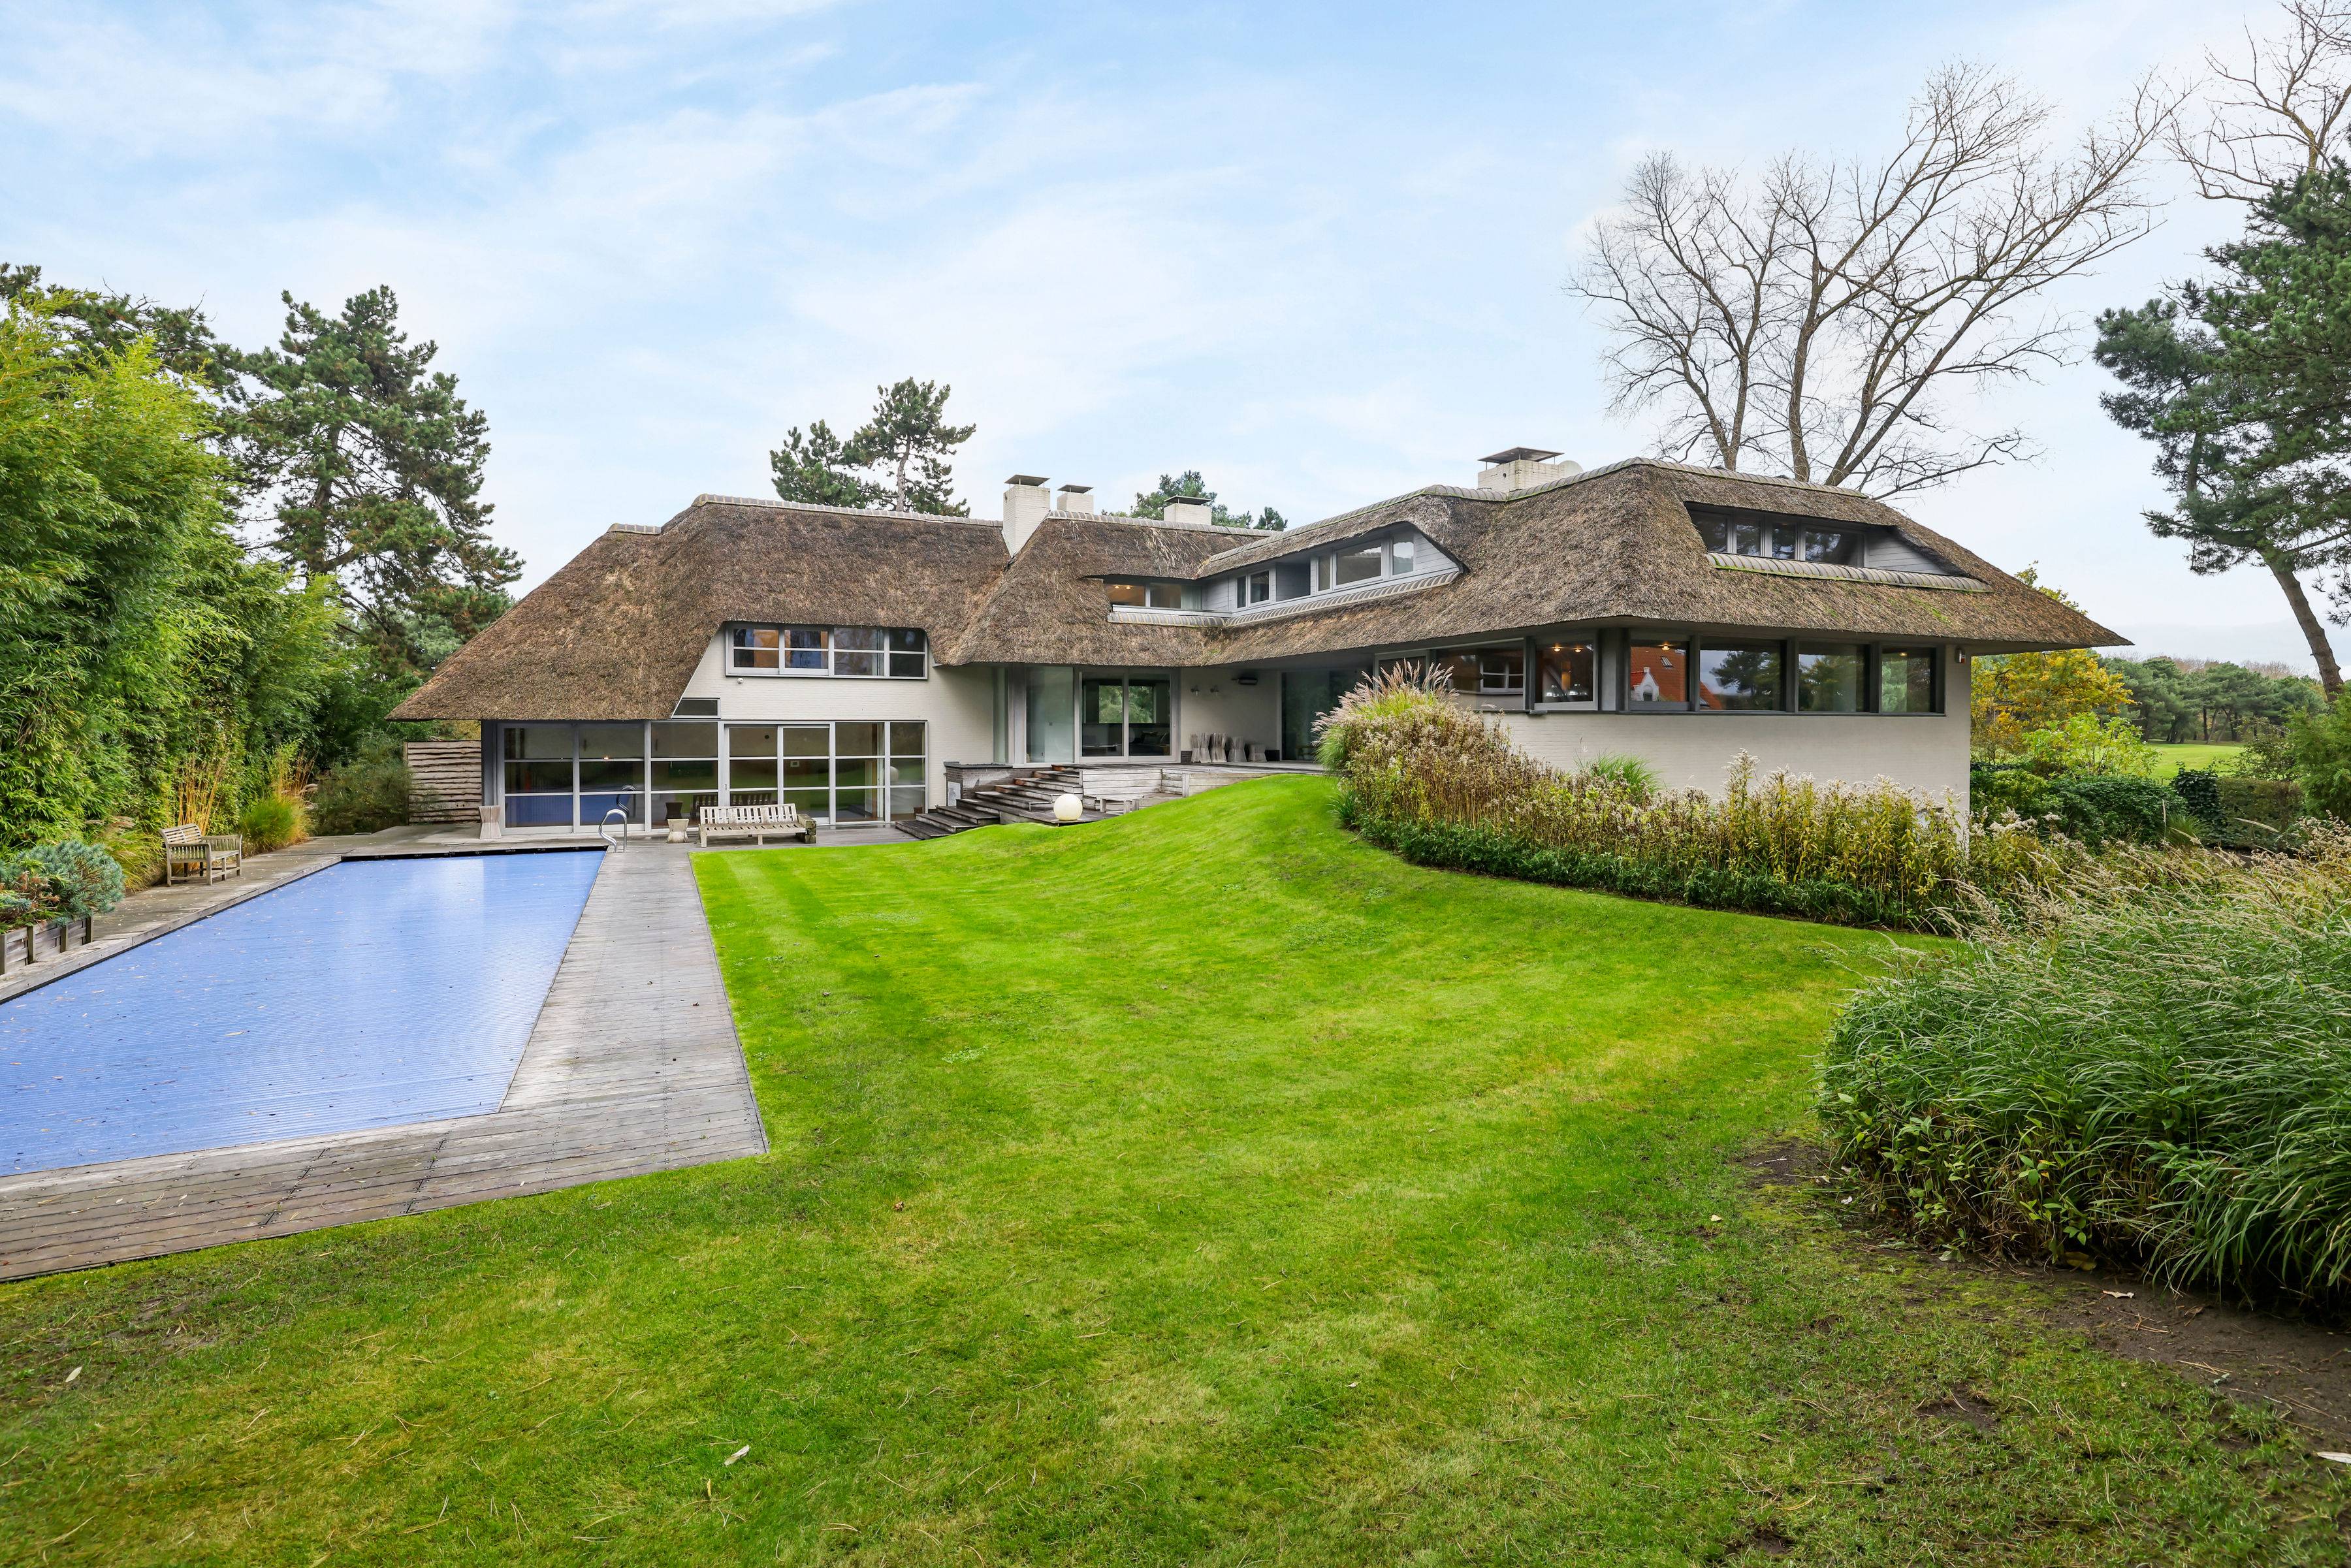 LUXURY VILLA WITH FULL SPA, POOL AND GOLF COURSE VIEWS IN KNOKKE